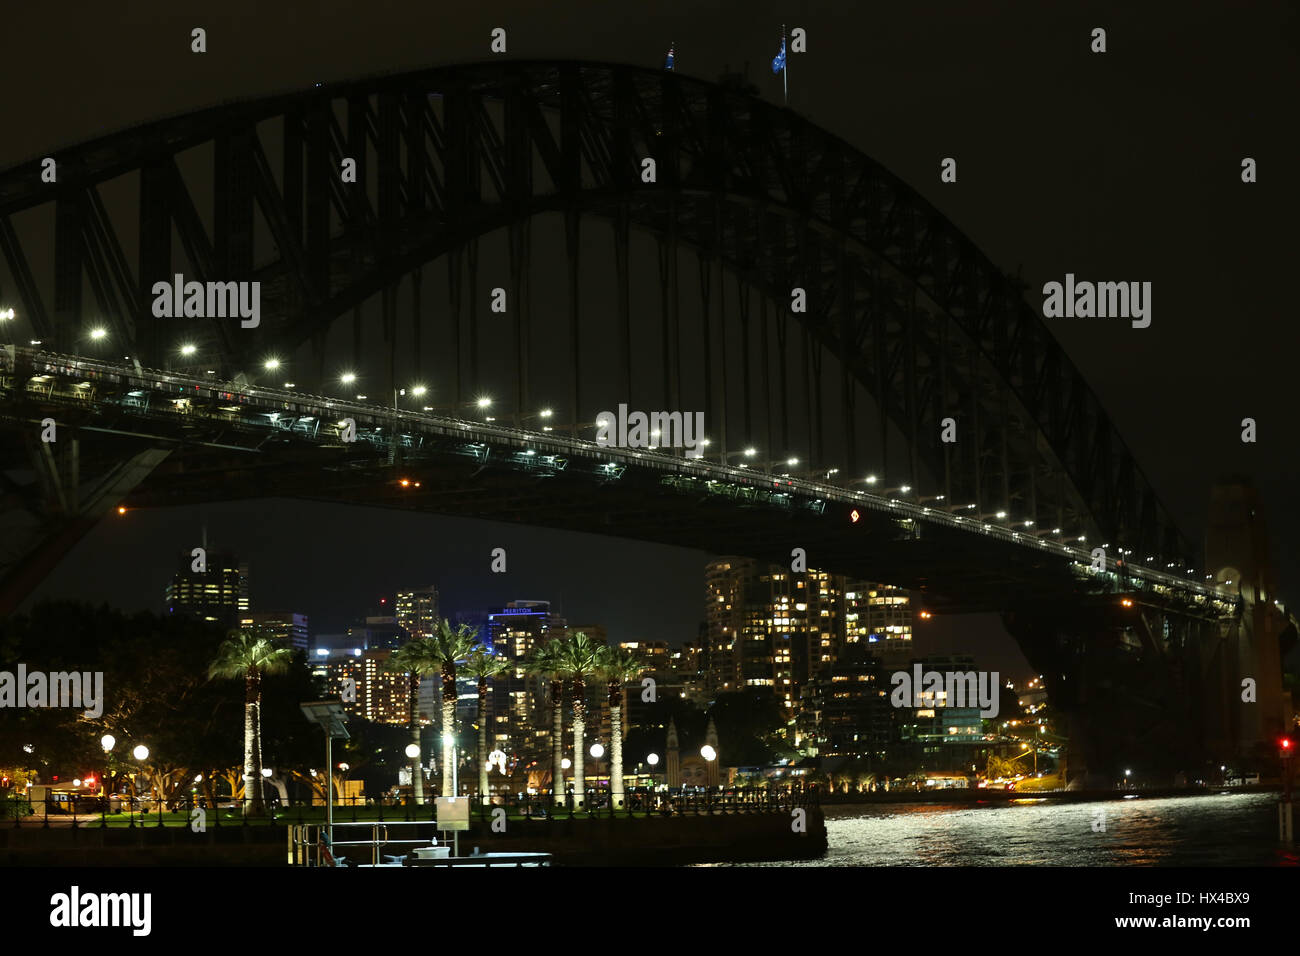 Sydney, Australia. 25 March 2017. The lights of the Sydney Opera House and the Sydney Harbour Bridge were turned off for one hour from 8:30pm to 9:30pm to mark ‘Earth Hour’. Pictured: Sydney Harbour Bridge just after Earth Hour. Credit: © Richard Milnes/Alamy Live News Stock Photo